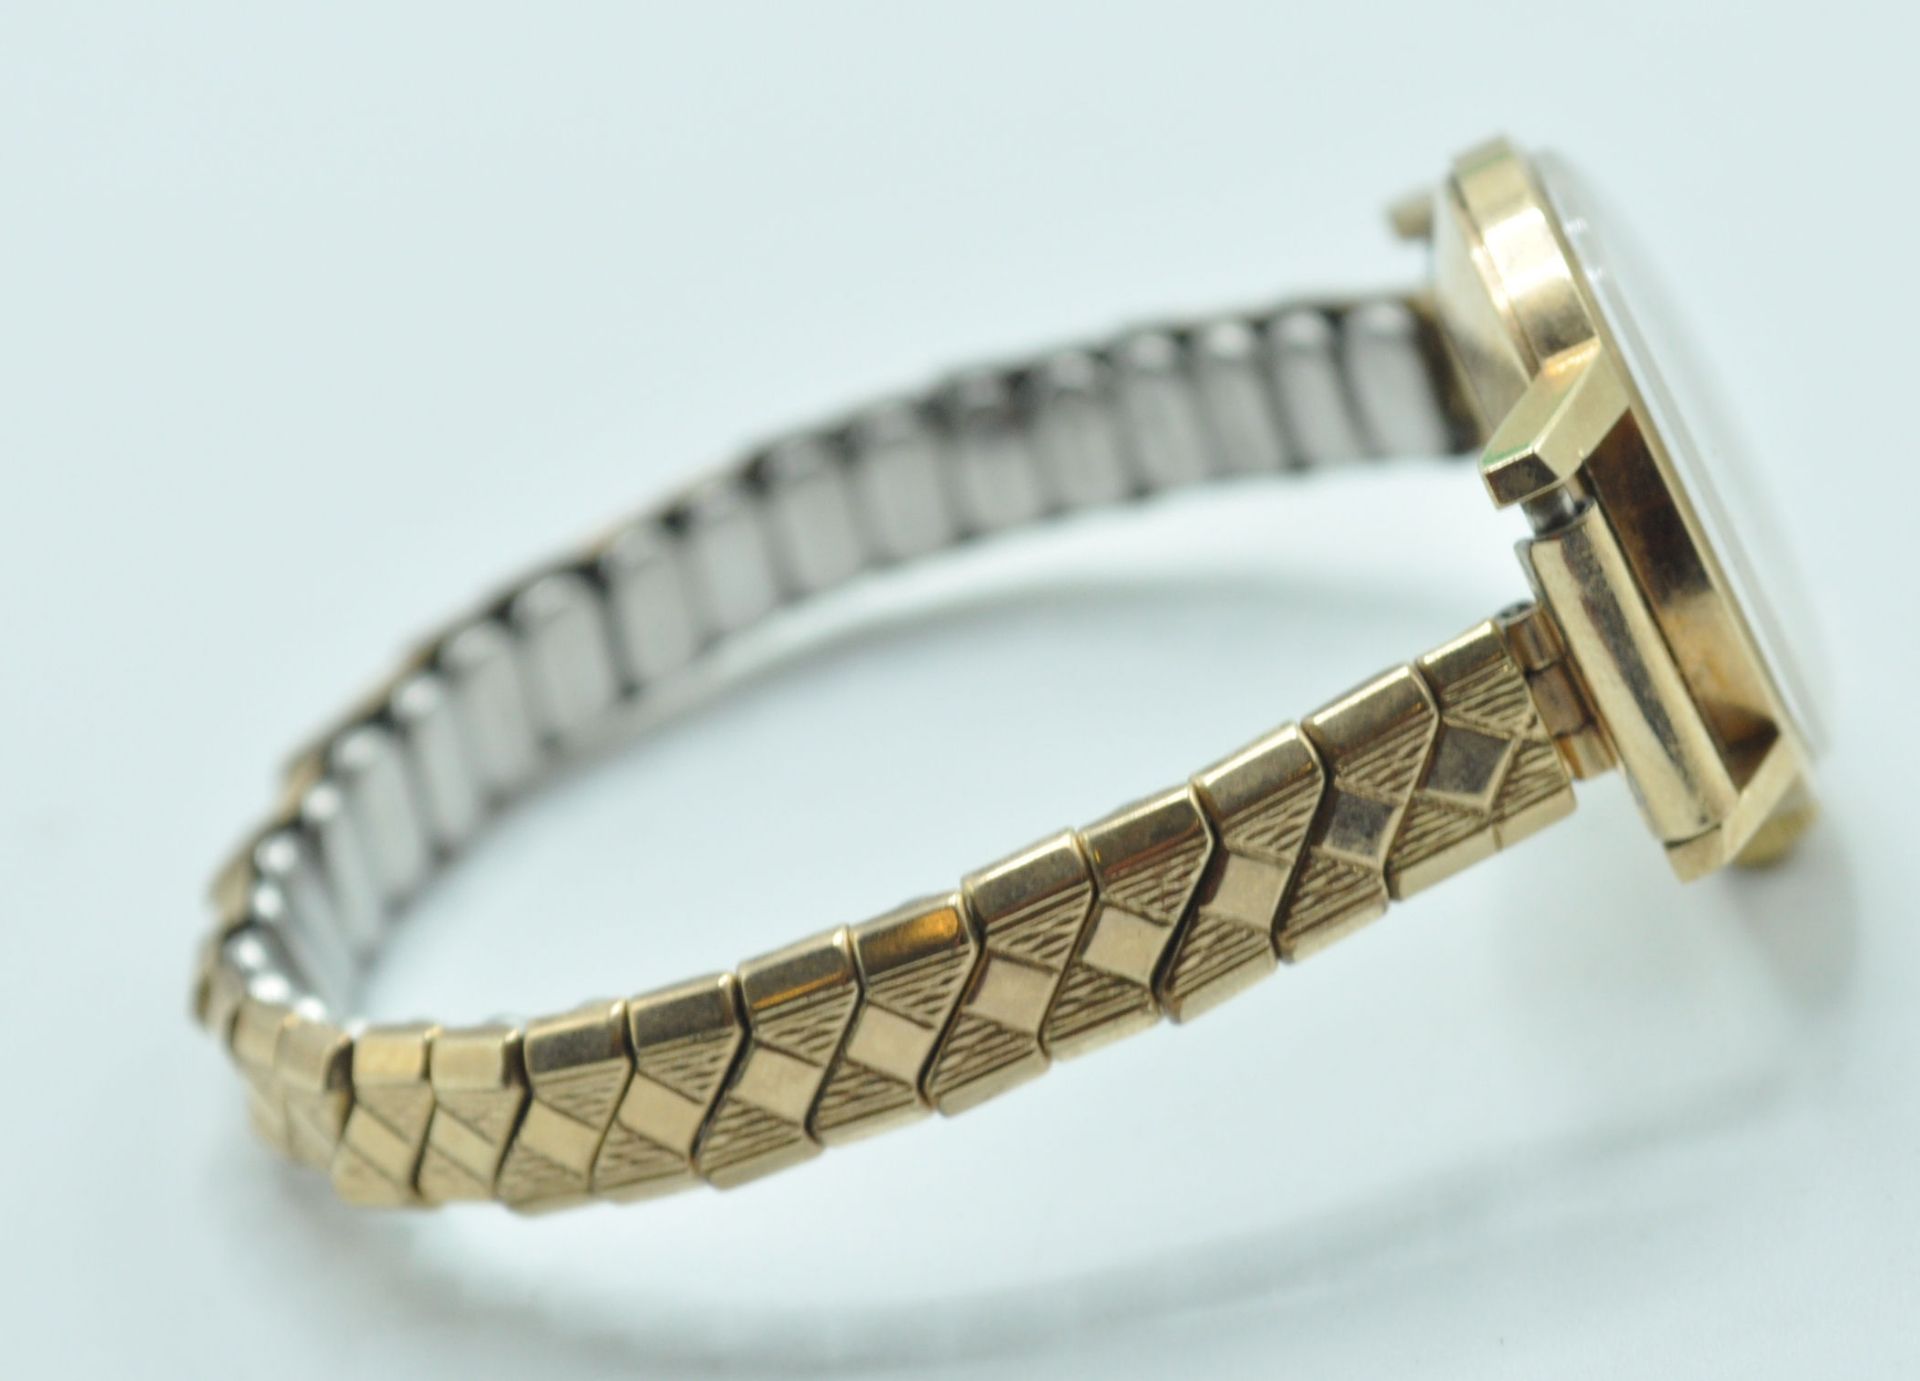 20TH CENTURY 17 JEWELS ZENITH LADIS WATCH IN A 9CT GOLD CASE. - Image 2 of 4